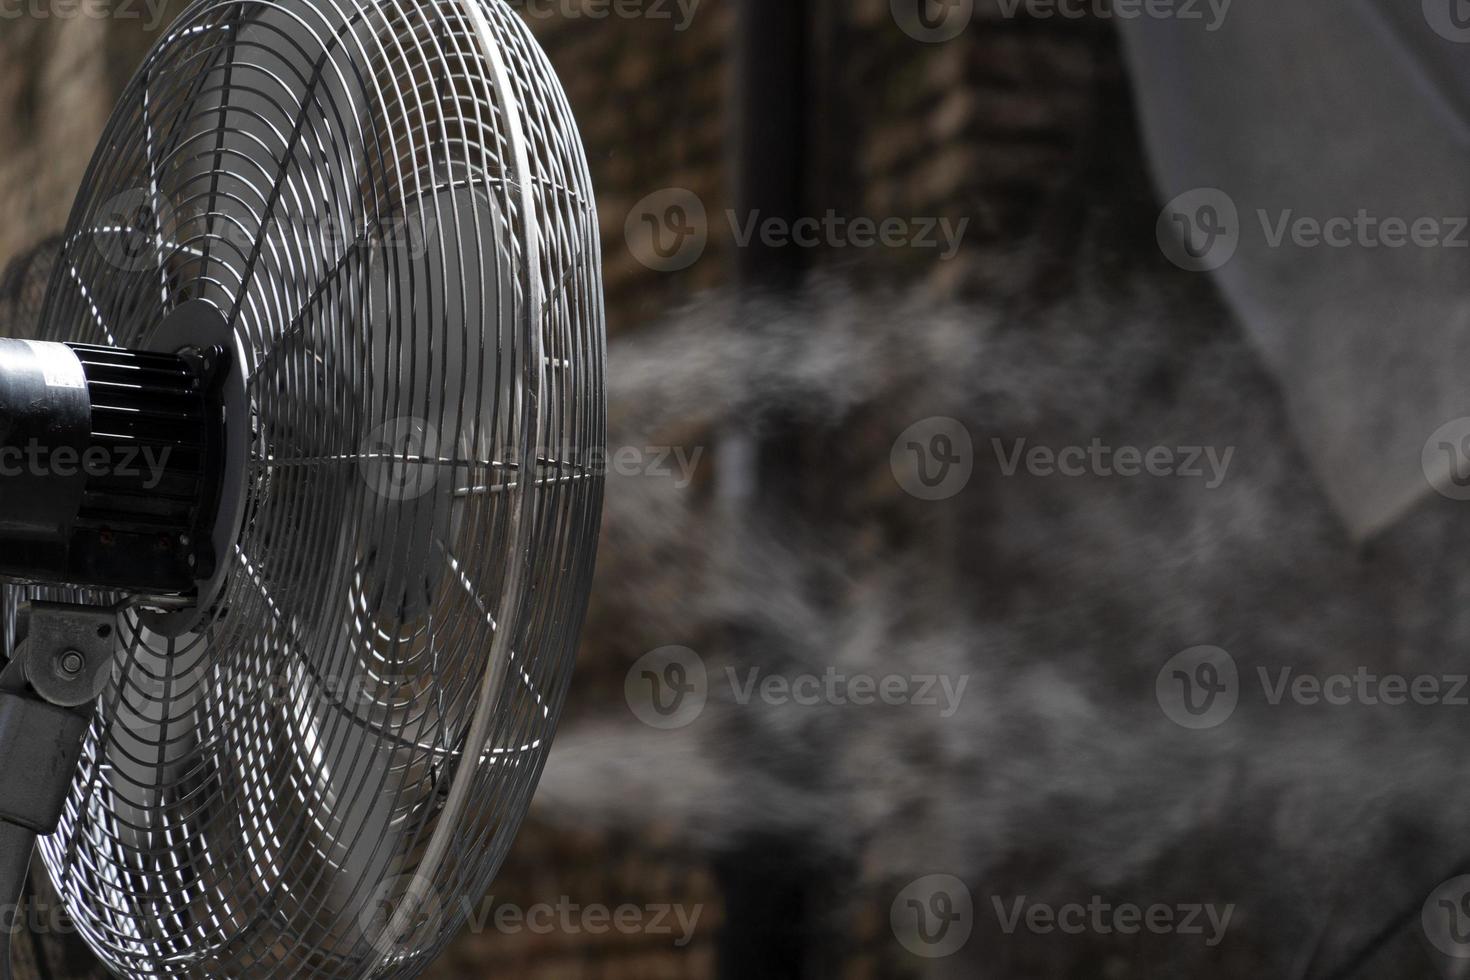 refresher fan with cold water spray photo